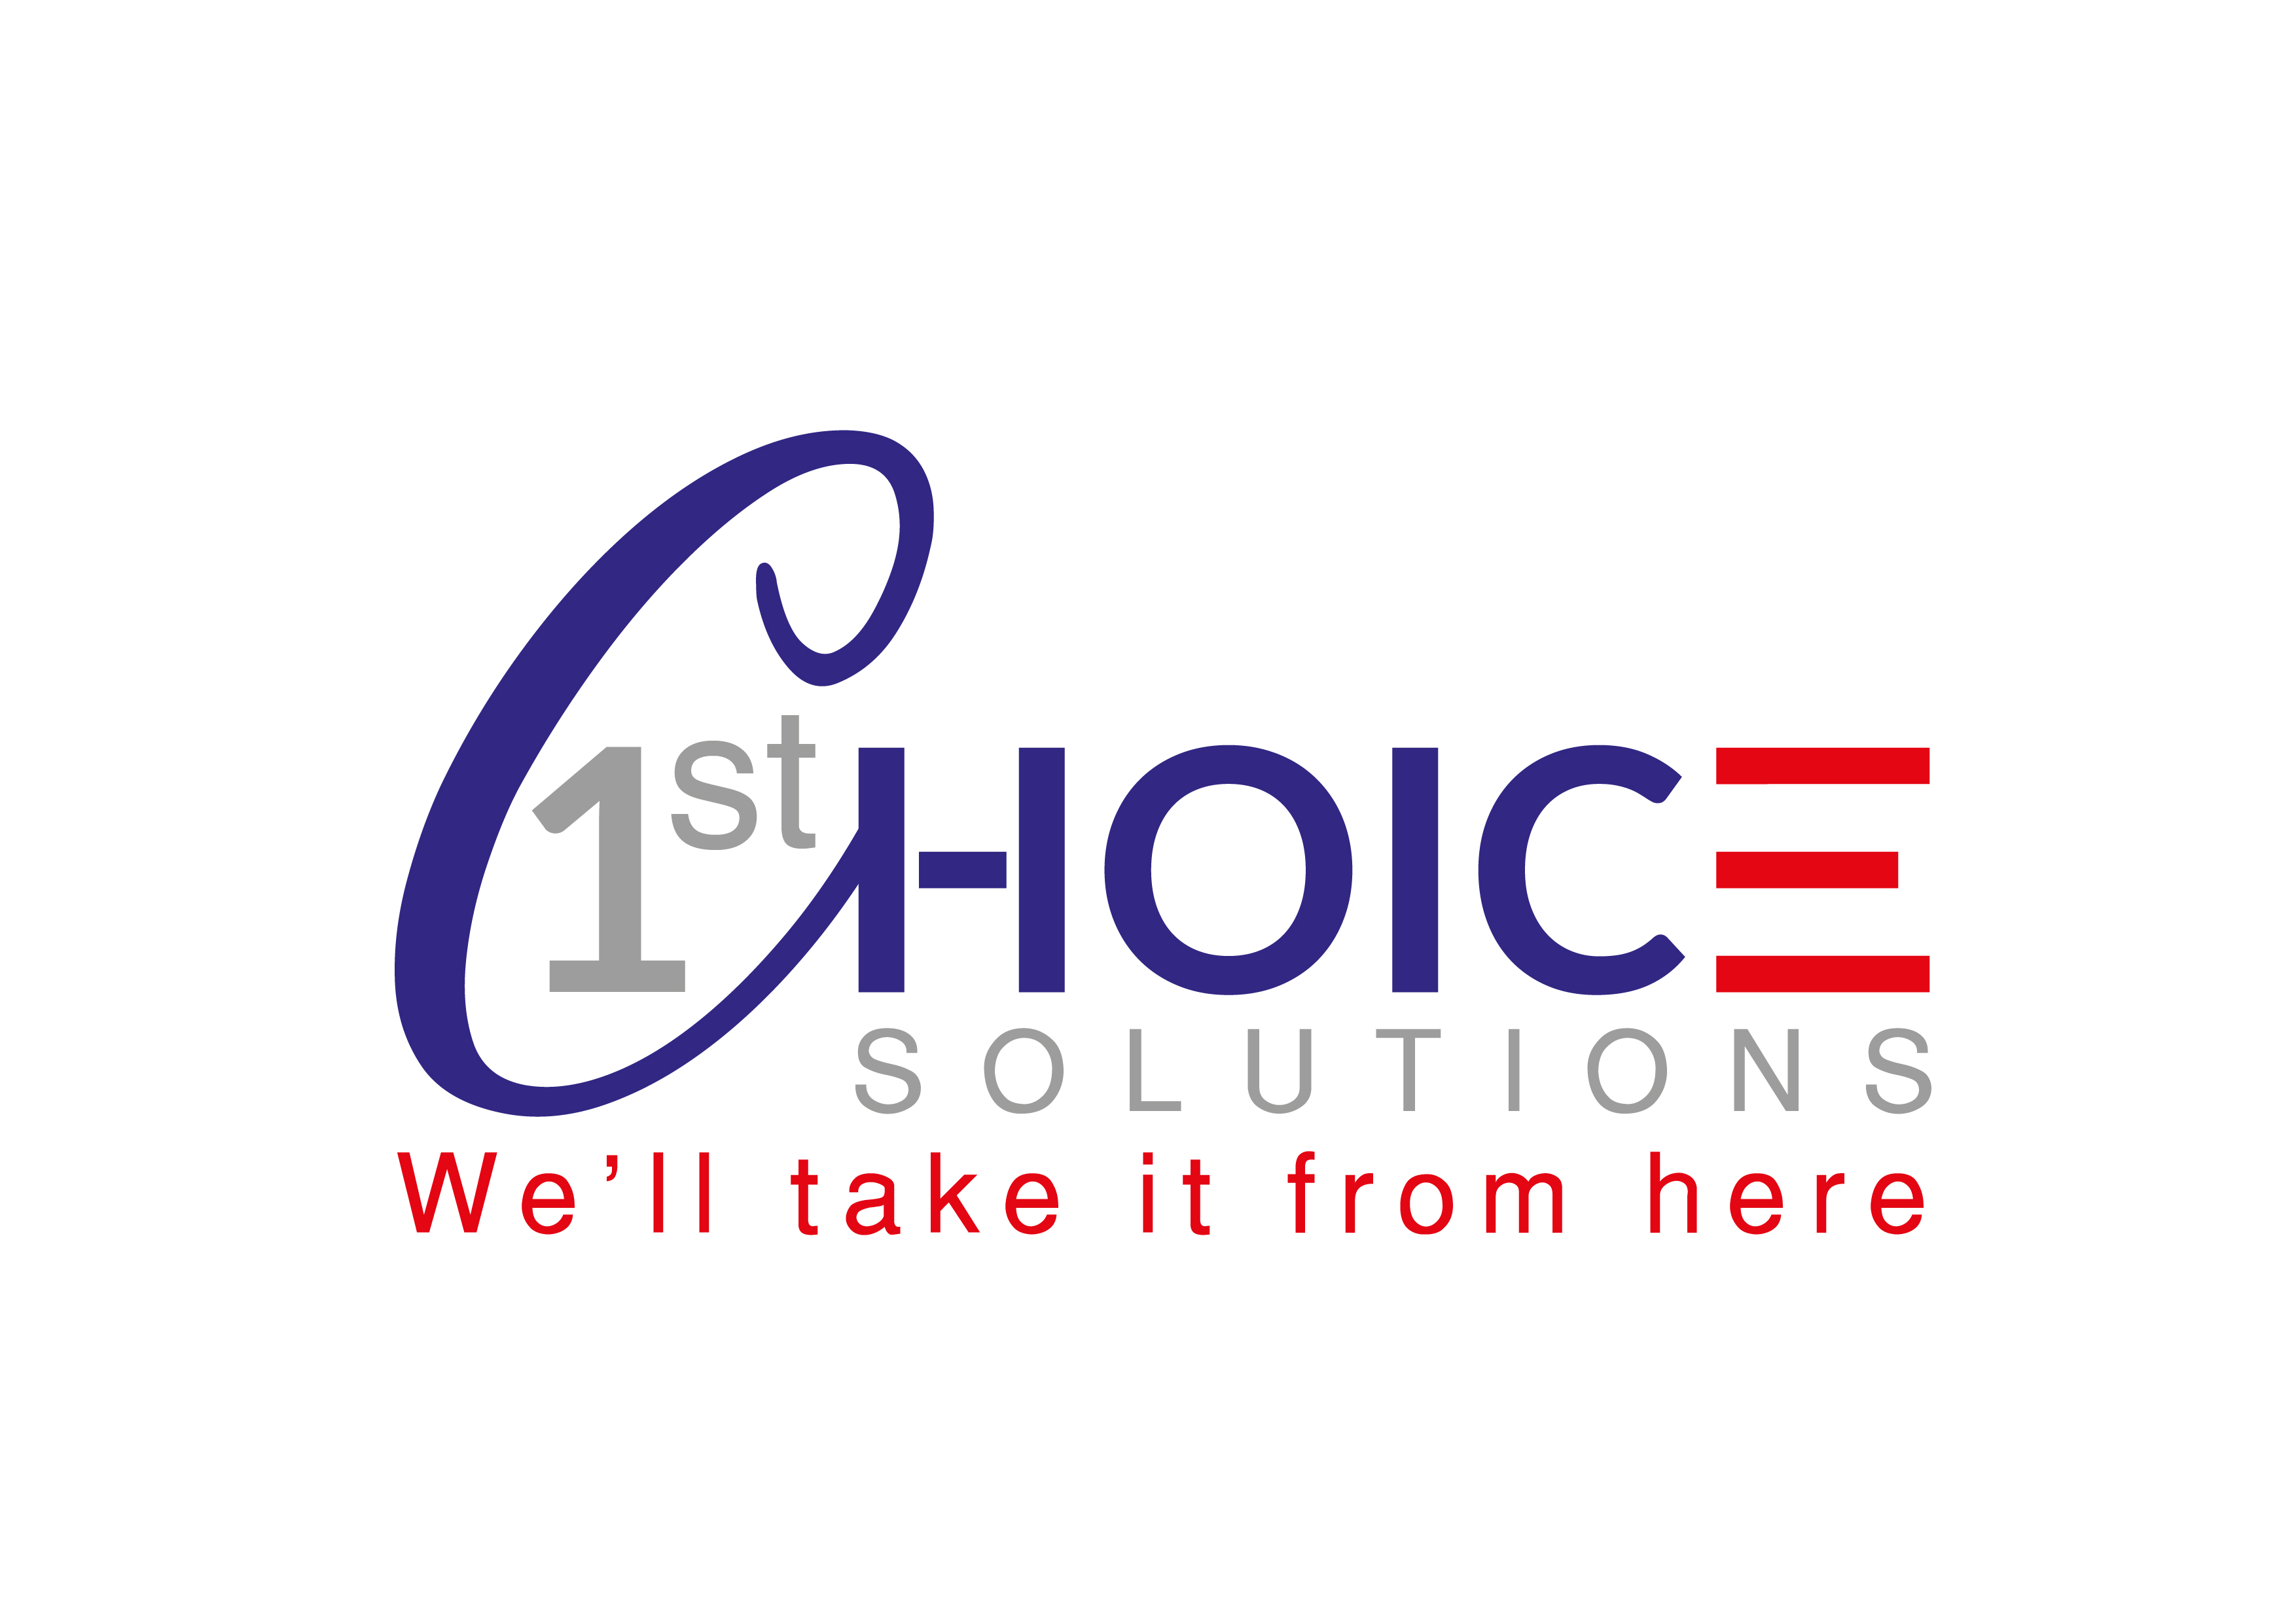 1st Choice Solutions